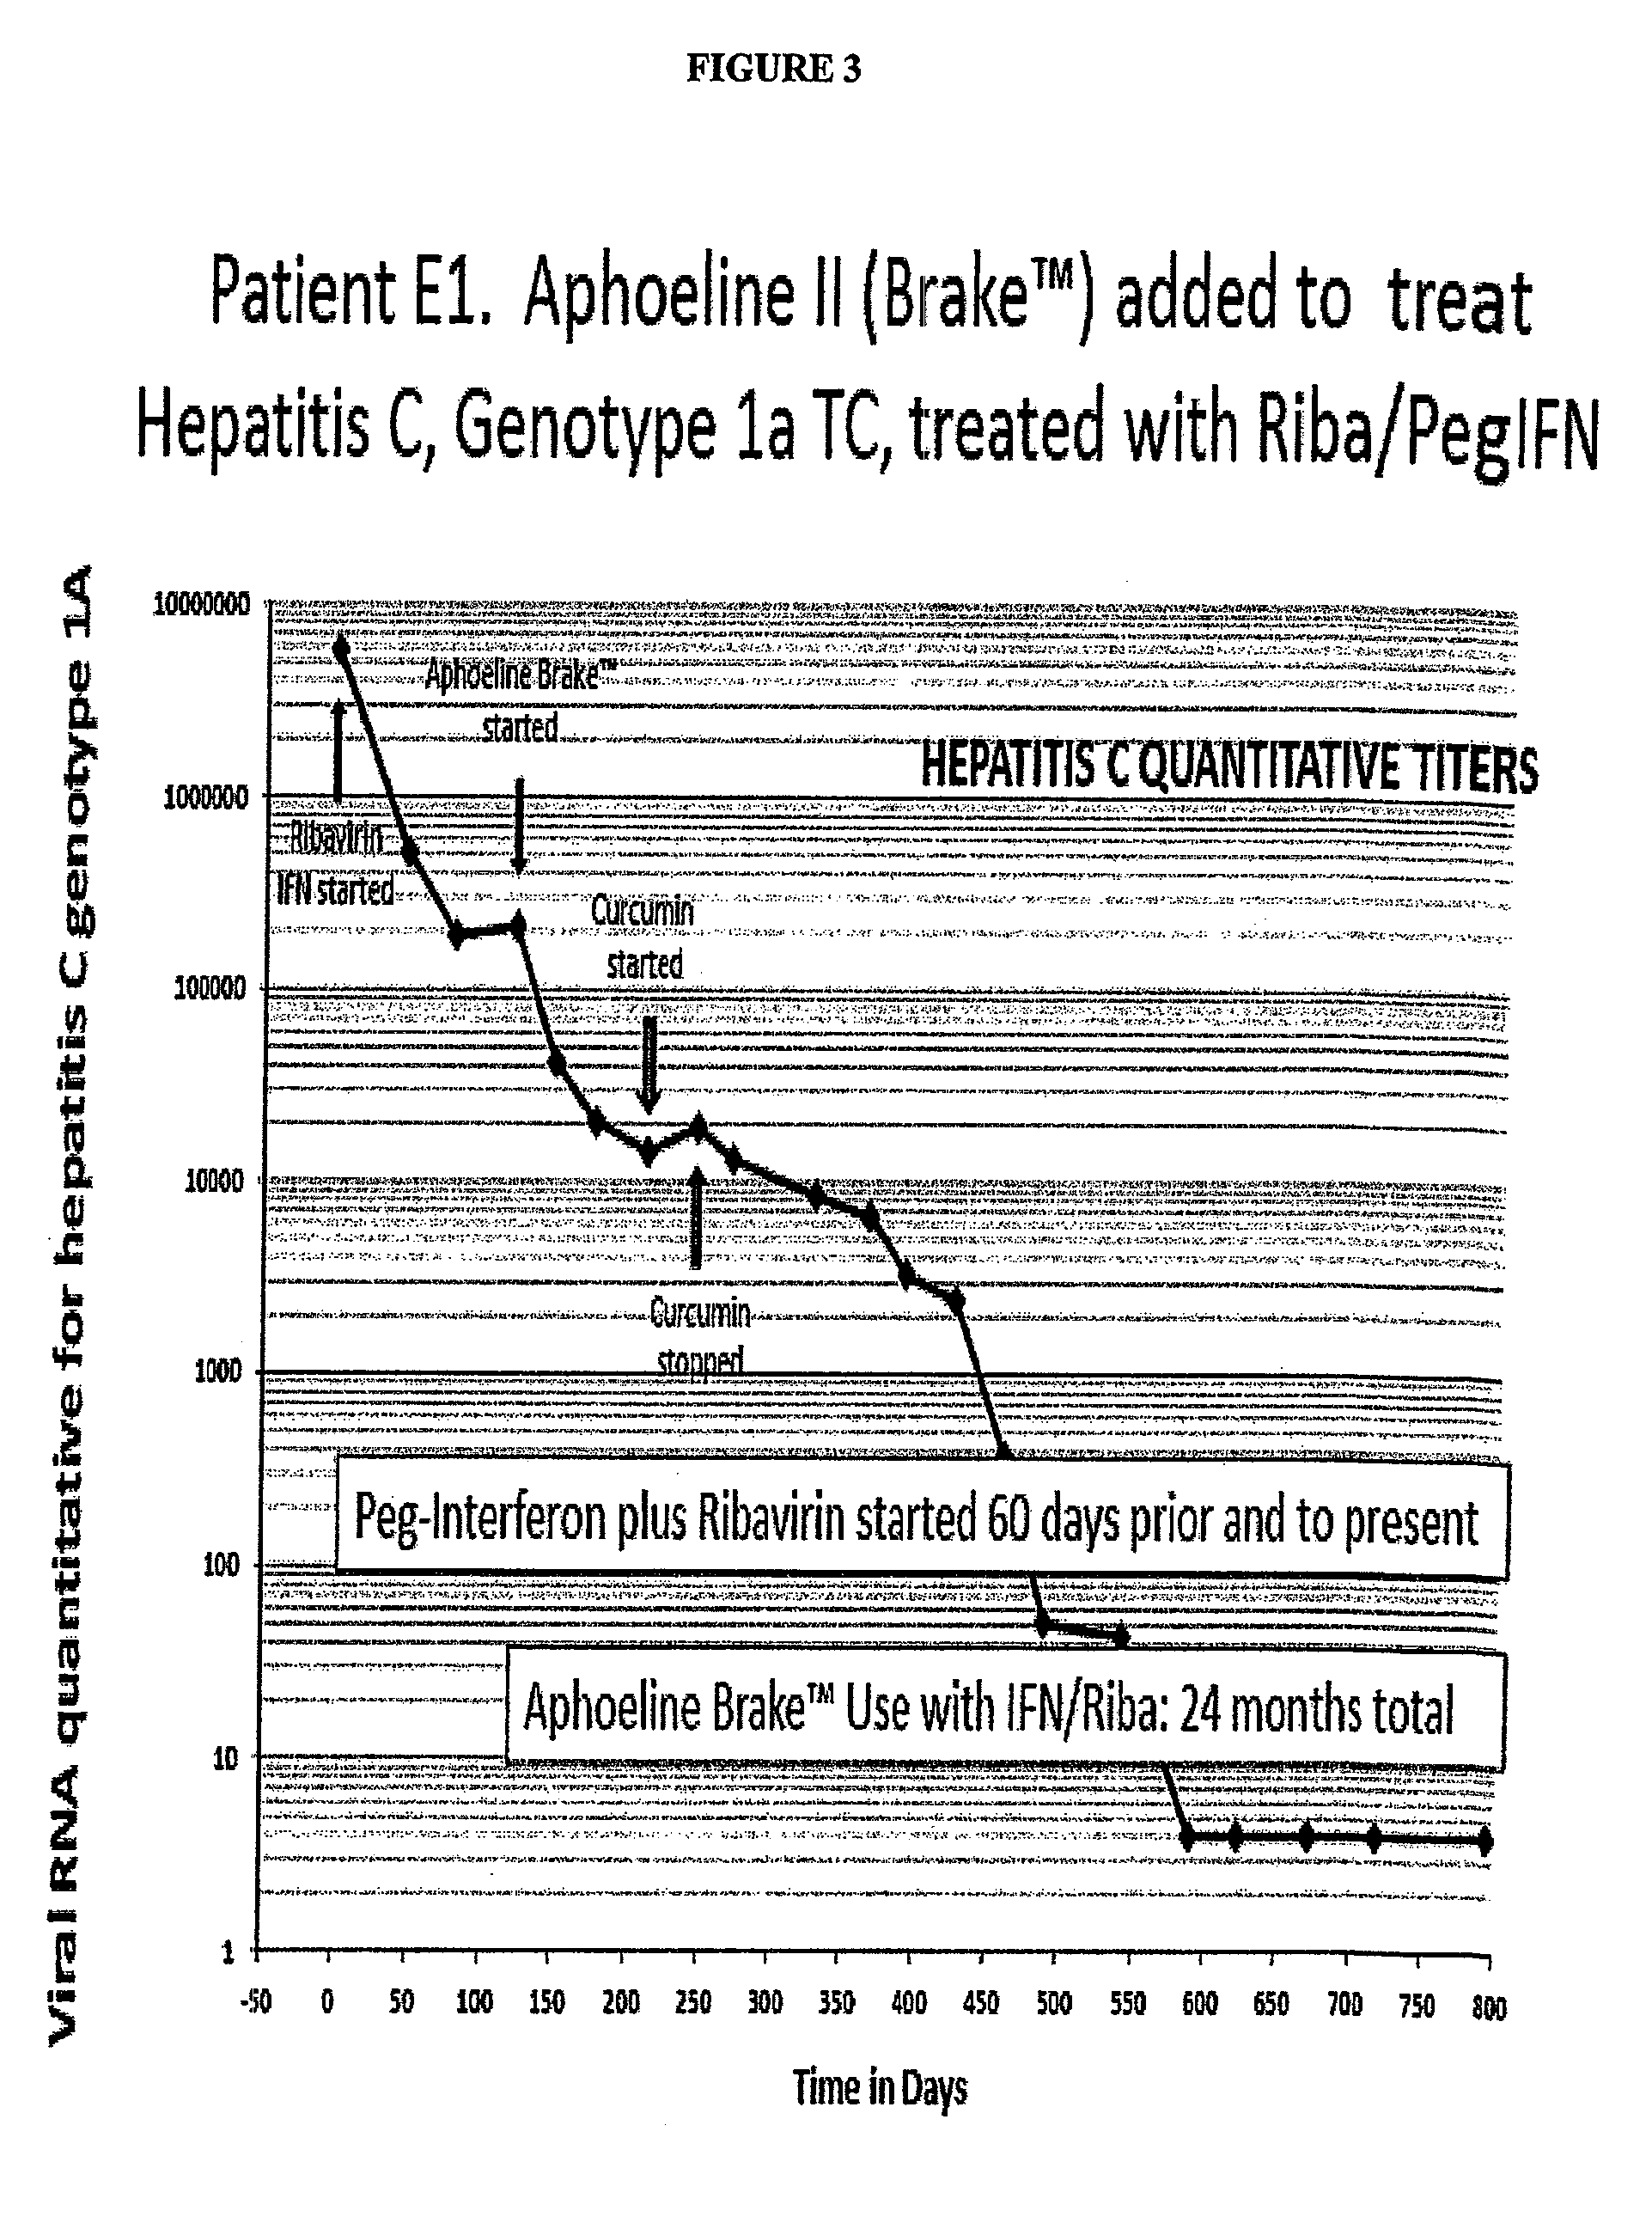 Compositions, methods of treatment and diagnostics for treatment of hepatic steatosis alone or in combination with a hepatitis C virus infection